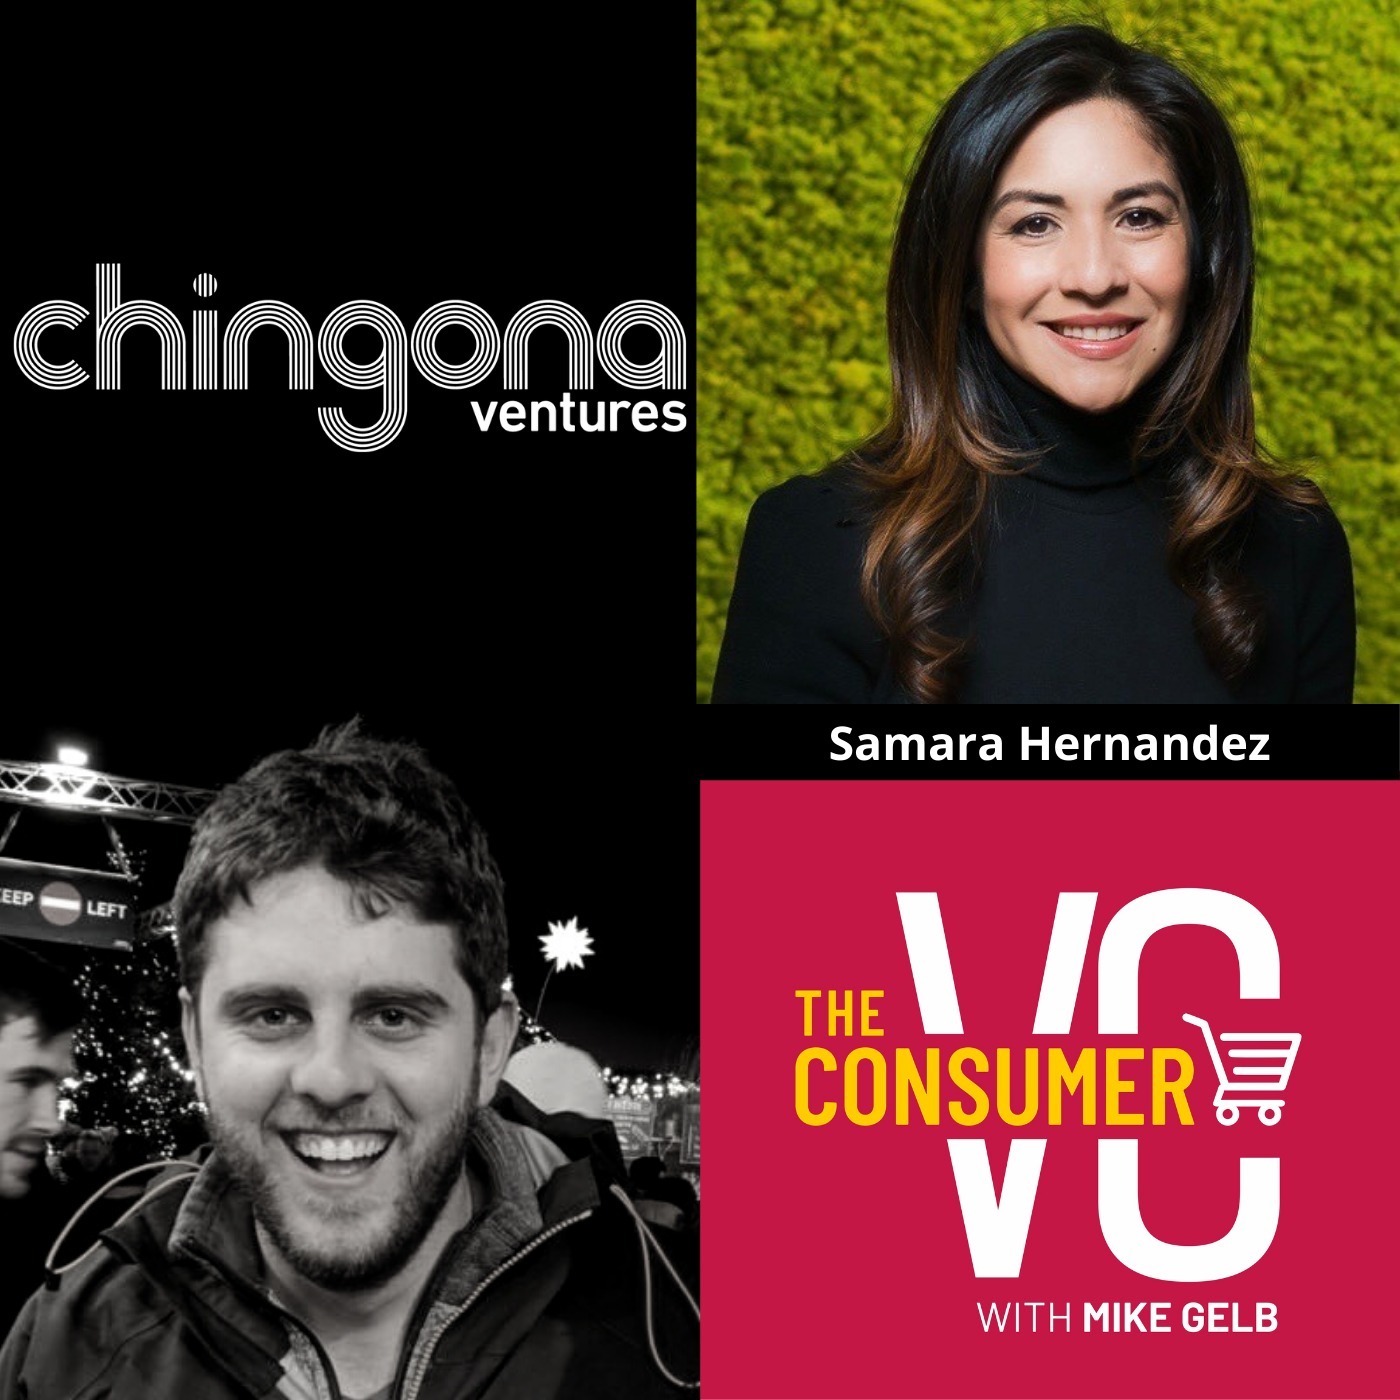 Samara Hernandez (Chingona Ventures) - Why Chicago, How Diverse VC Teams Lead To Investing In Markets That Are Overlooked, and Some of the Differences When Investing In Consumer vs. Enterprise